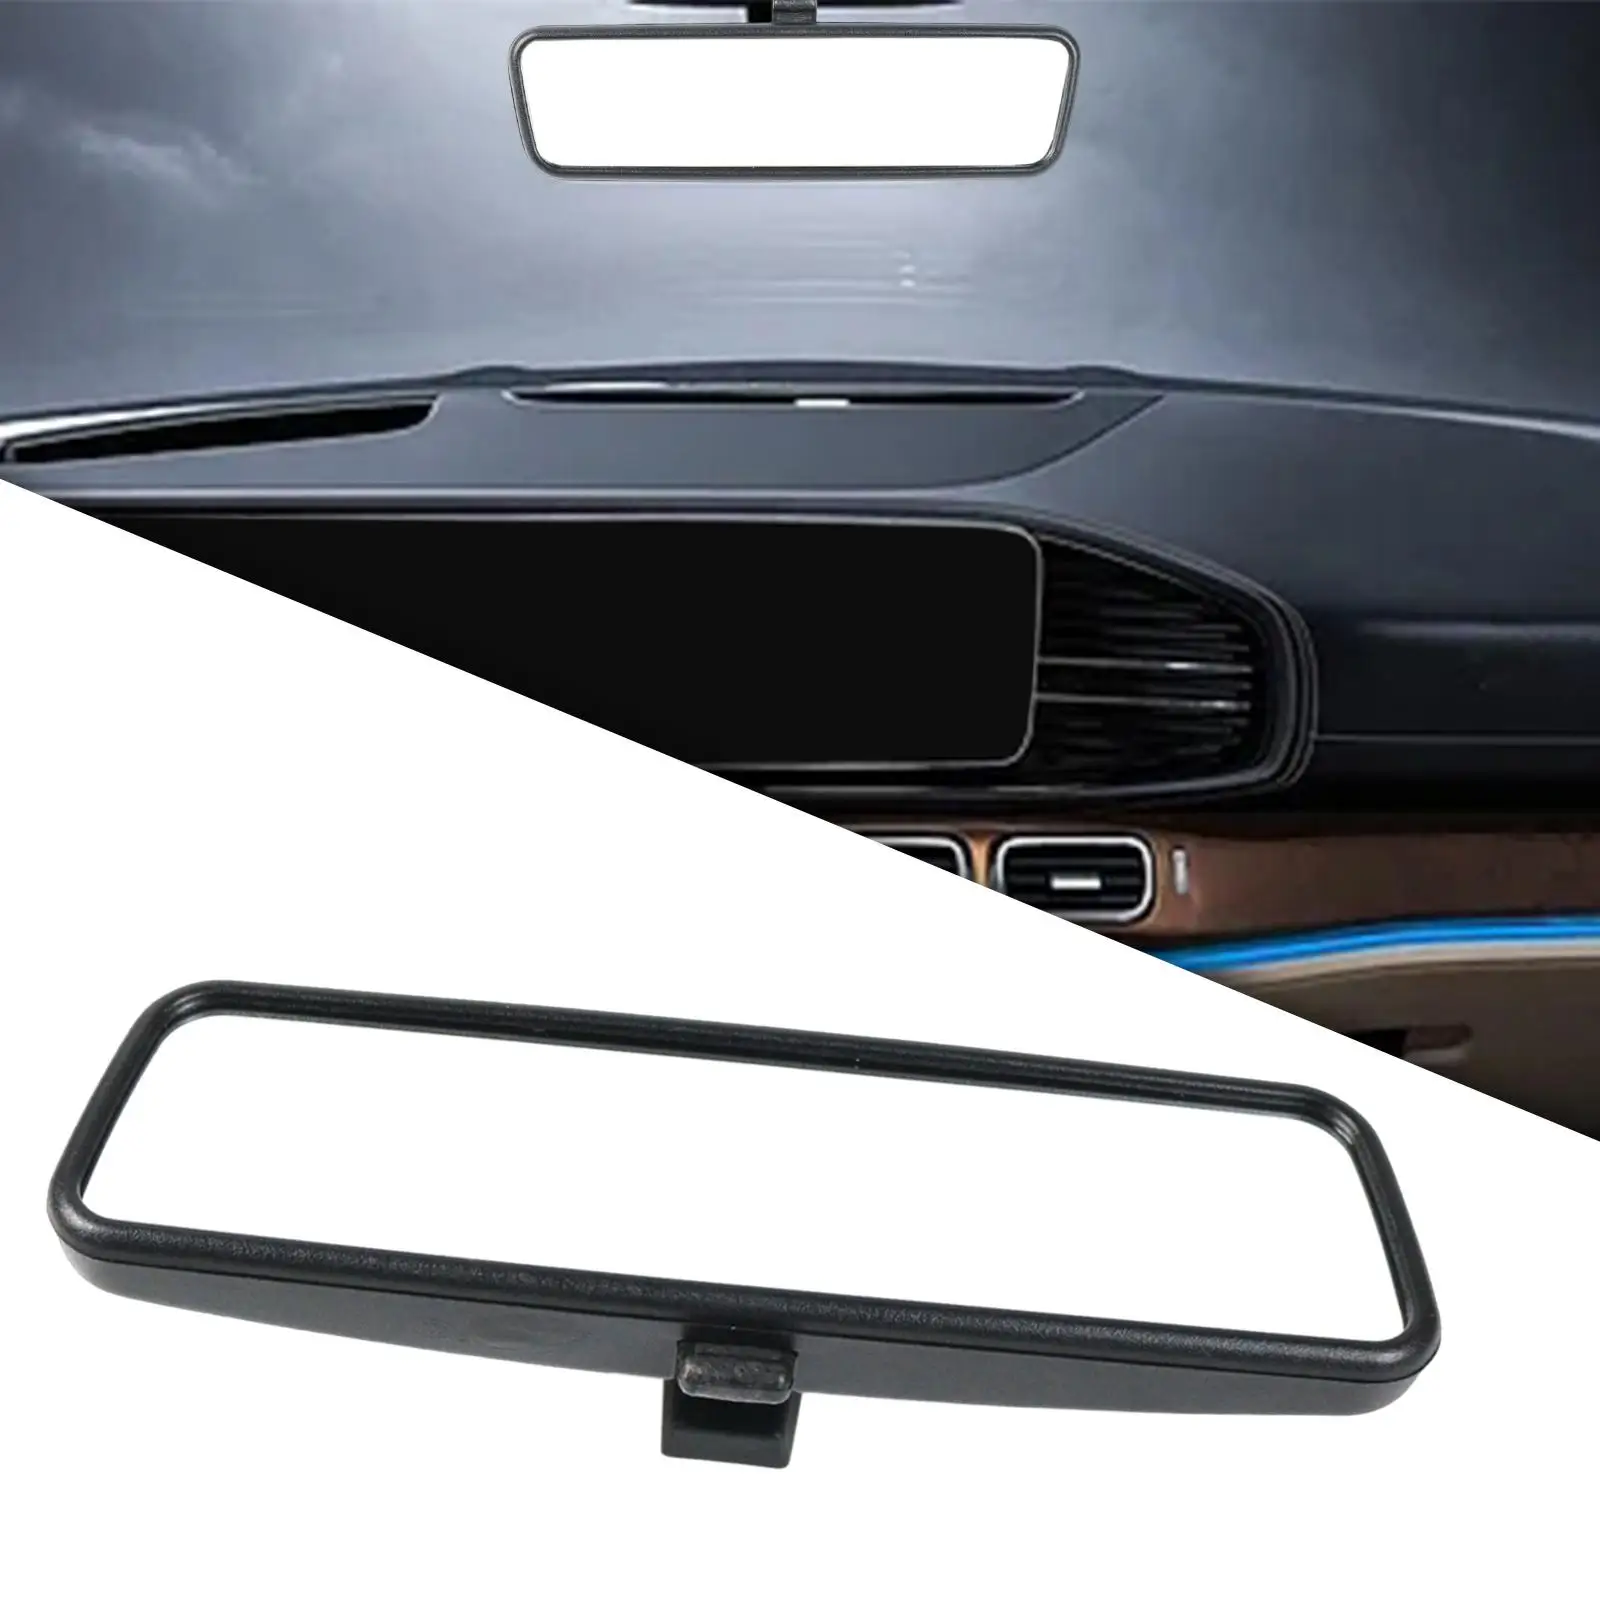 Interior Rear View Mirror 814842 Rearview Mirror for Peugeot 107 Car Accessory Direct Replaces Easy to Install